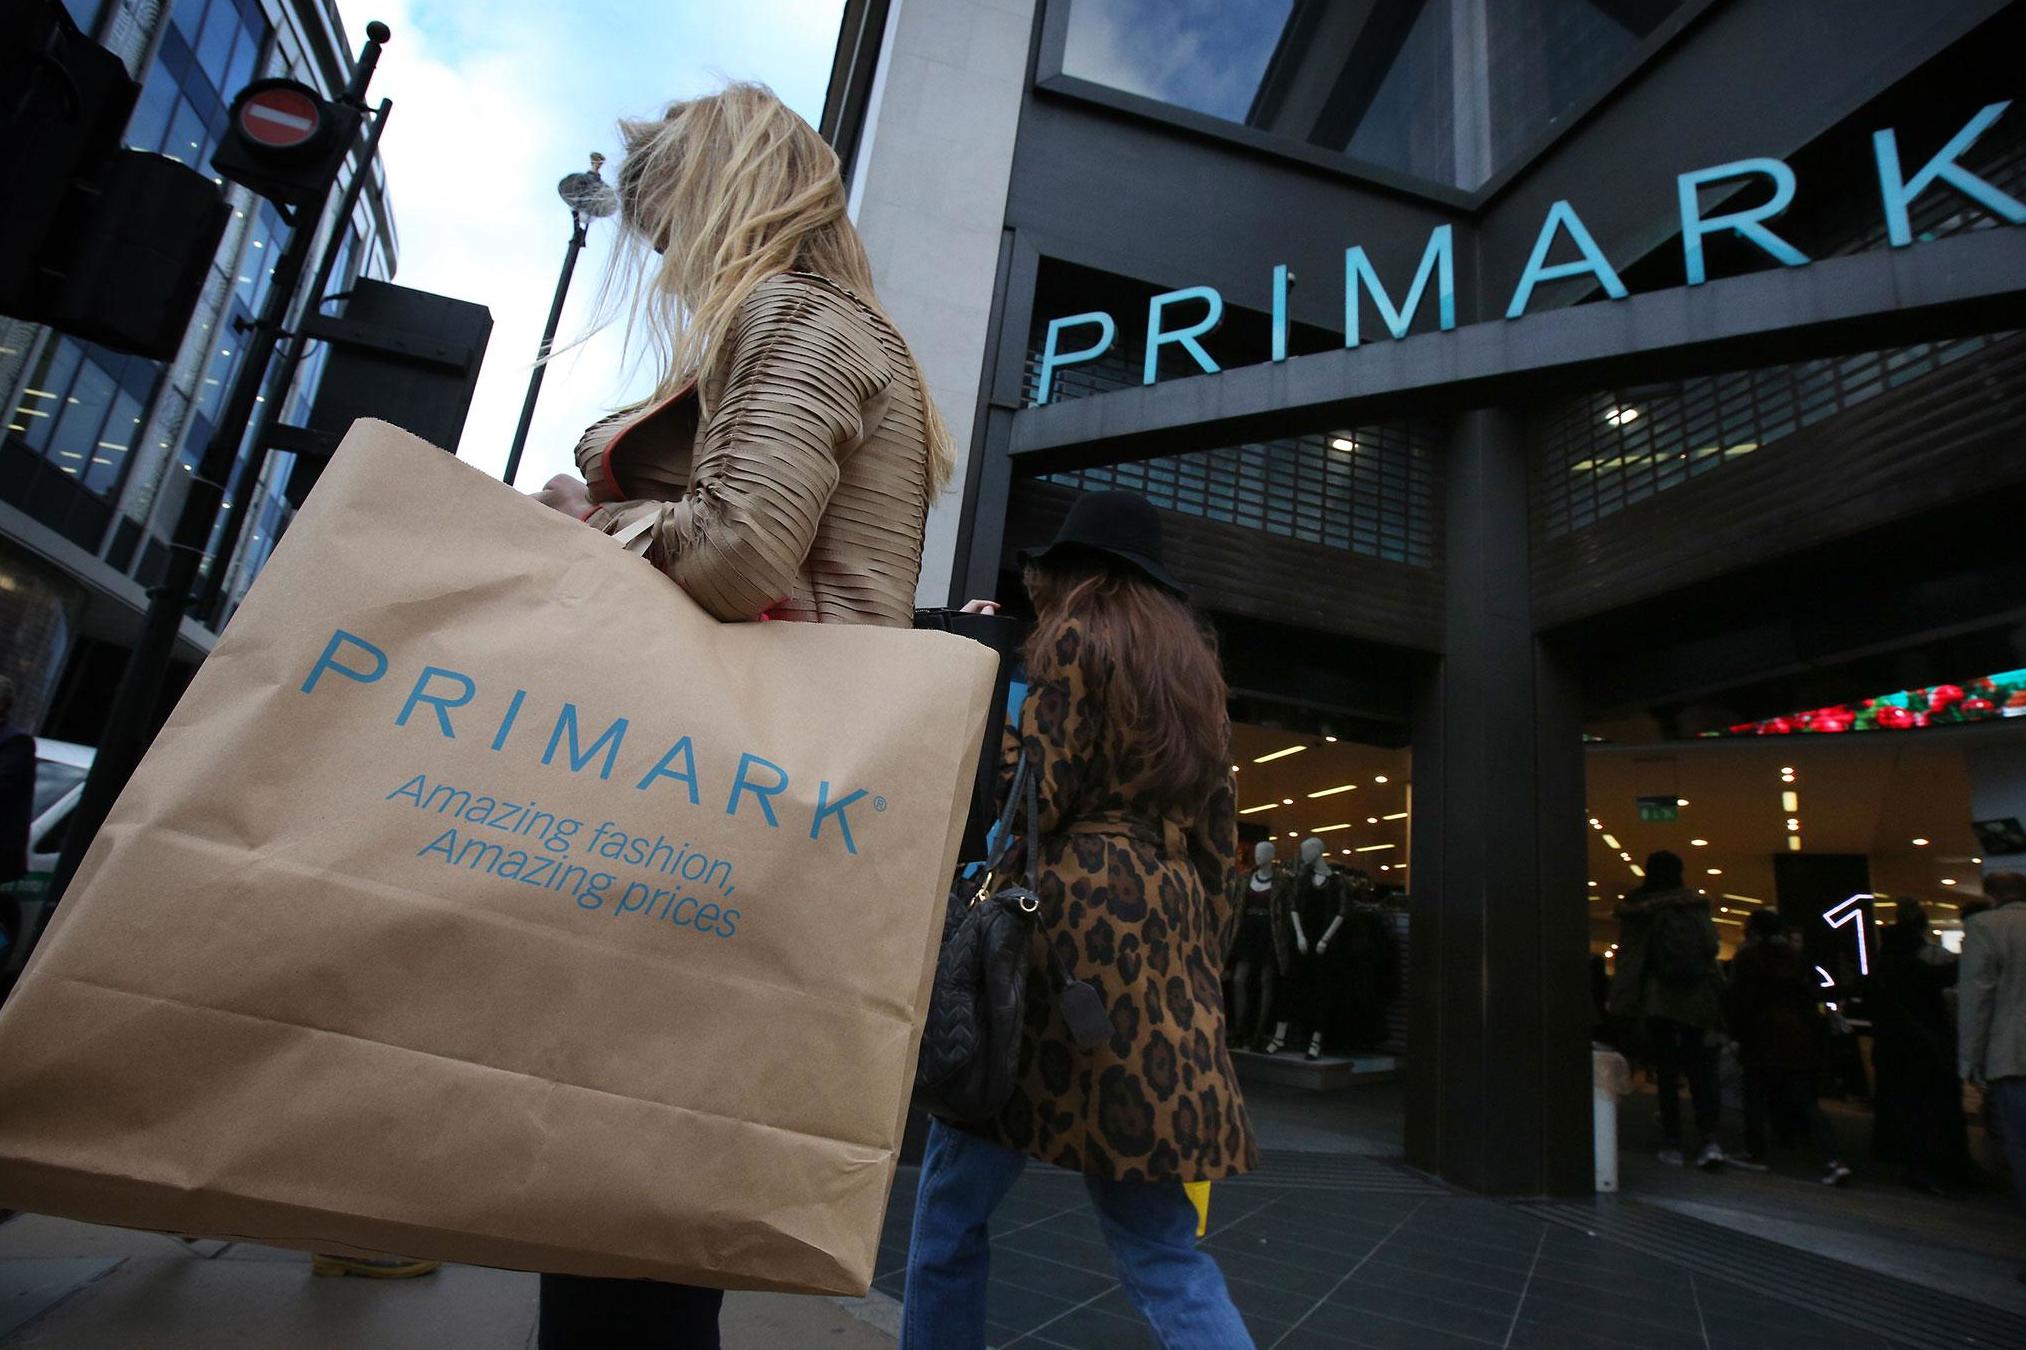 The voucher claims that Primark is giving away the coupons as part of the discount retailer’s anniversary celebrations